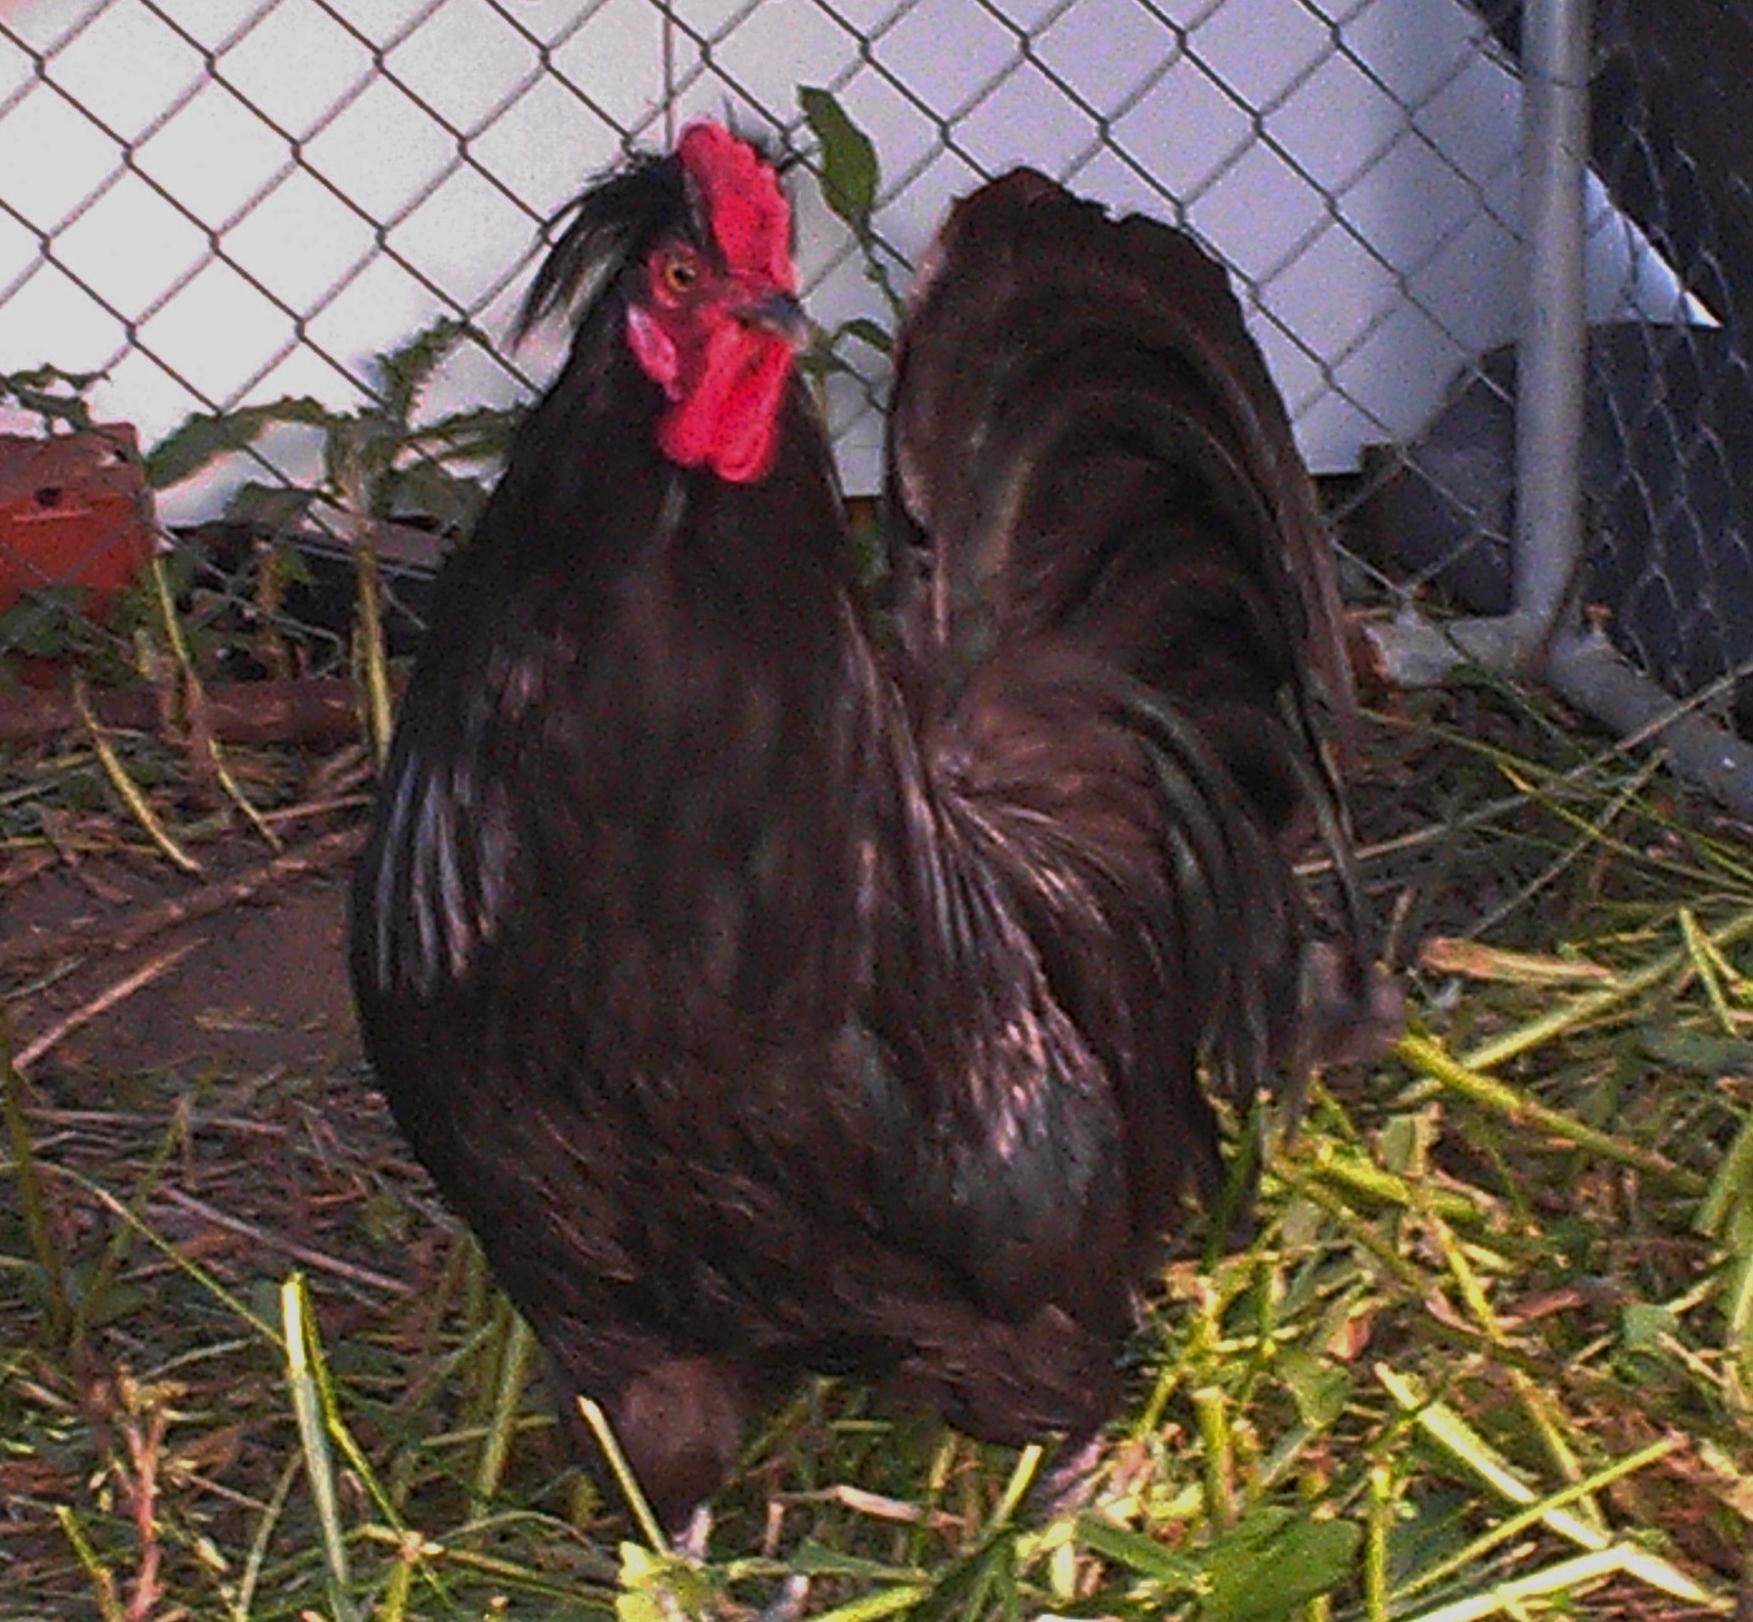 Sir William, 'da man!  Got him and 6 hens as a Mother's Day present to myself.